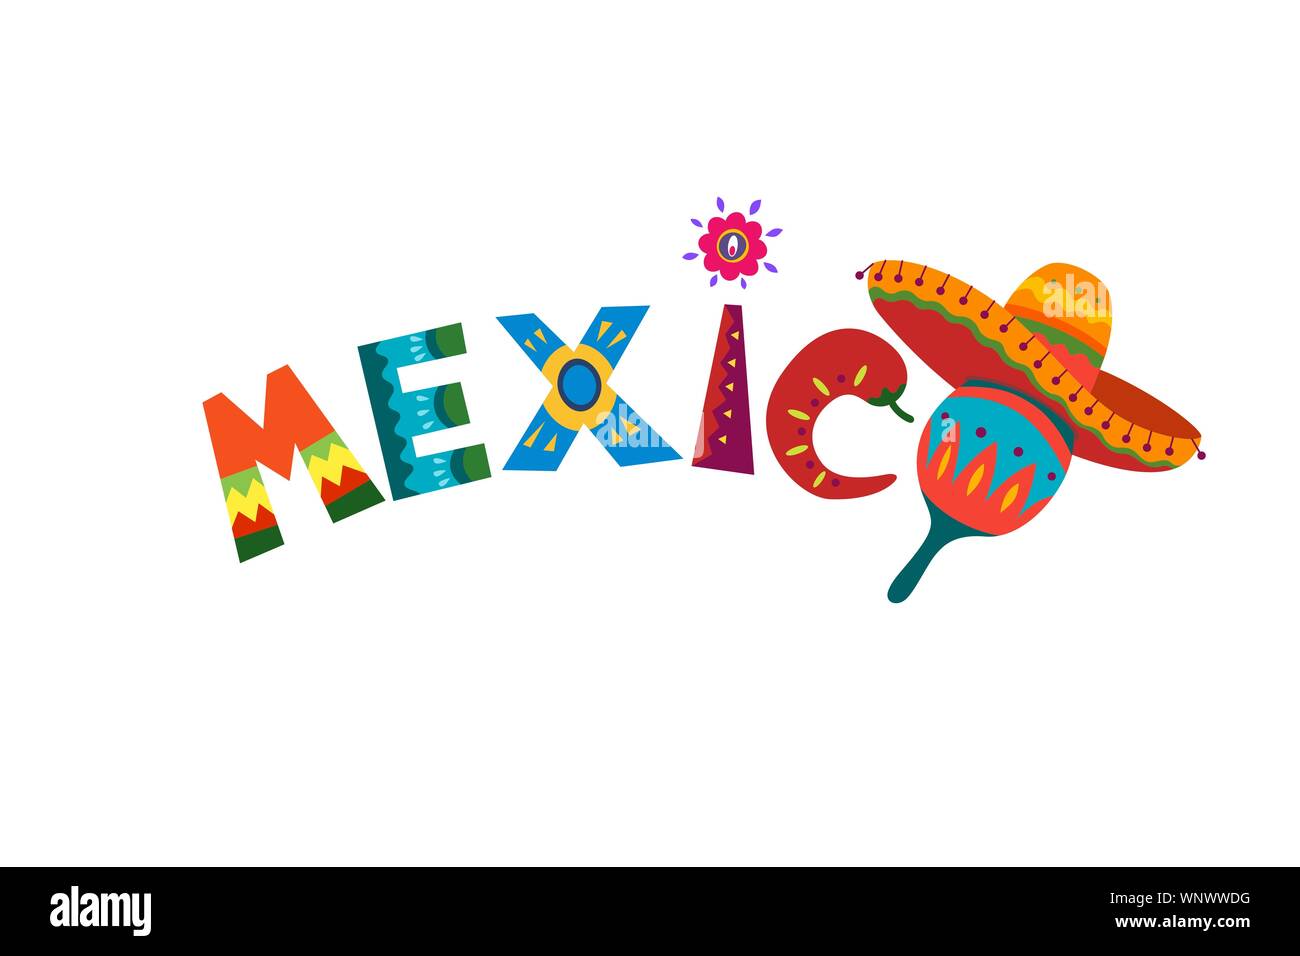 Mexico word in Mexican traditional ornament text for festive card or invitation in country. Bright design element sun with fiesta style chilli and sombrero. Colorful ethnic vector design illustration Stock Vector